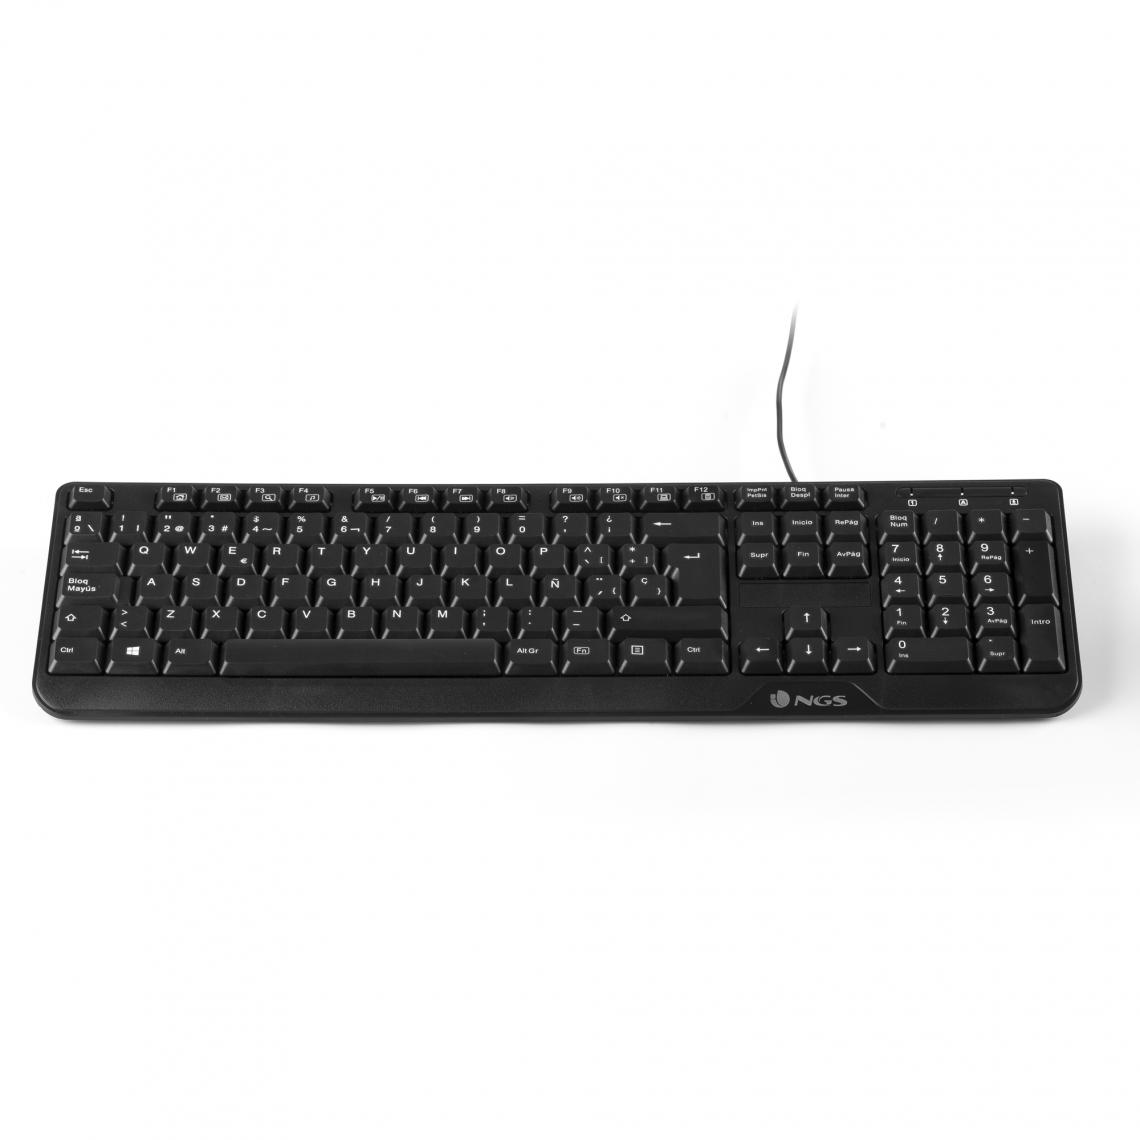 Ngs - Pack Clavier - Souris Cocoa (Noir) - Pack Clavier Souris